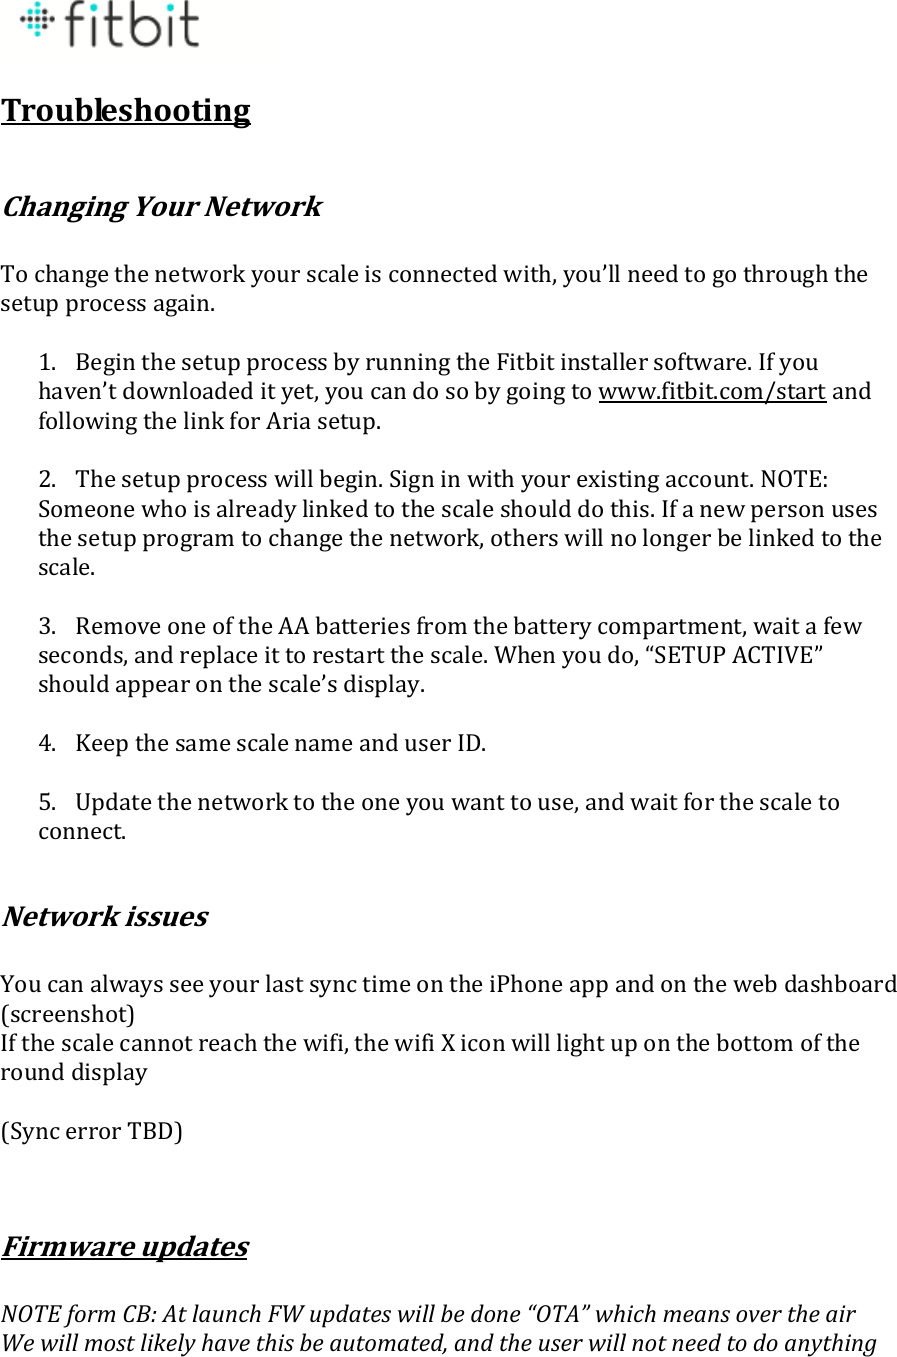  Troubleshooting  Changing Your Network  To change the network your scale is connected with, you’ll need to go through the setup process again.   1. Begin the setup process by running the Fitbit installer software. If you haven’t downloaded it yet, you can do so by going to www.fitbit.com/start and following the link for Aria setup.  2. The setup process will begin. Sign in with your existing account. NOTE: Someone who is already linked to the scale should do this. If a new person uses the setup program to change the network, others will no longer be linked to the scale.  3. Remove one of the AA batteries from the battery compartment, wait a few seconds, and replace it to restart the scale. When you do, “SETUP ACTIVE” should appear on the scale’s display.  4. Keep the same scale name and user ID.  5. Update the network to the one you want to use, and wait for the scale to connect.  Network issues  You can always see your last sync time on the iPhone app and on the web dashboard (screenshot) If the scale cannot reach the wifi, the wifi X icon will light up on the bottom of the round display  (Sync error TBD)   Firmware updates  NOTE form CB: At launch FW updates will be done “OTA” which means over the air We will most likely have this be automated, and the user will not need to do anything 